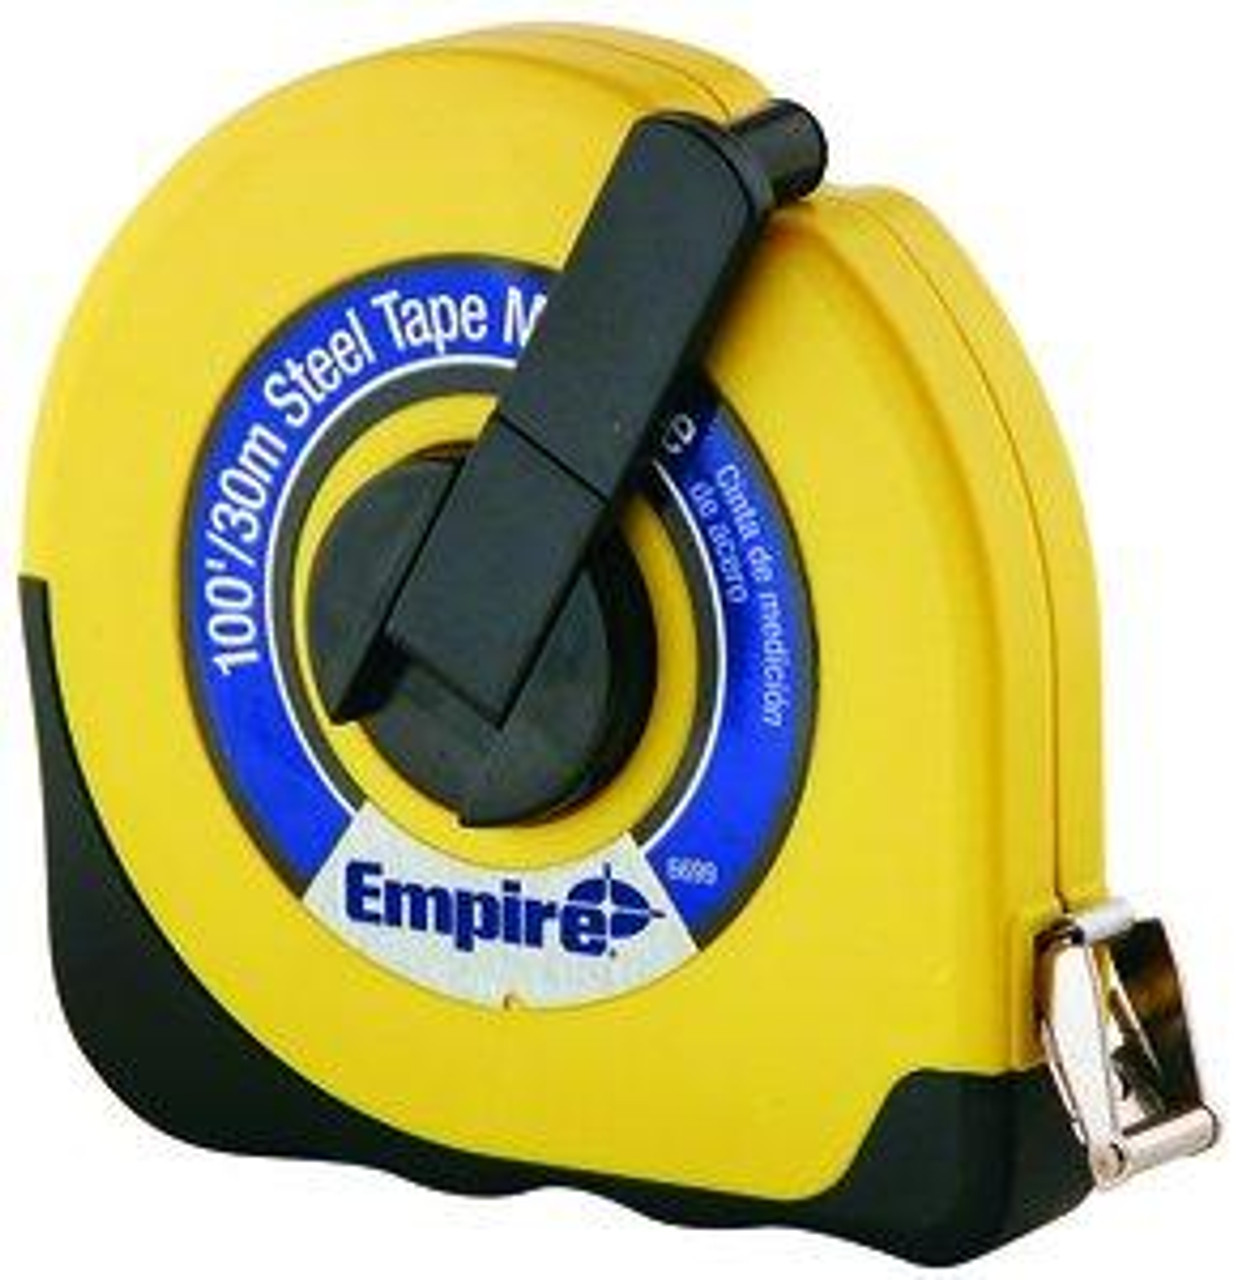 Empire Closed Case Steel Tape Reel - Fence-Material